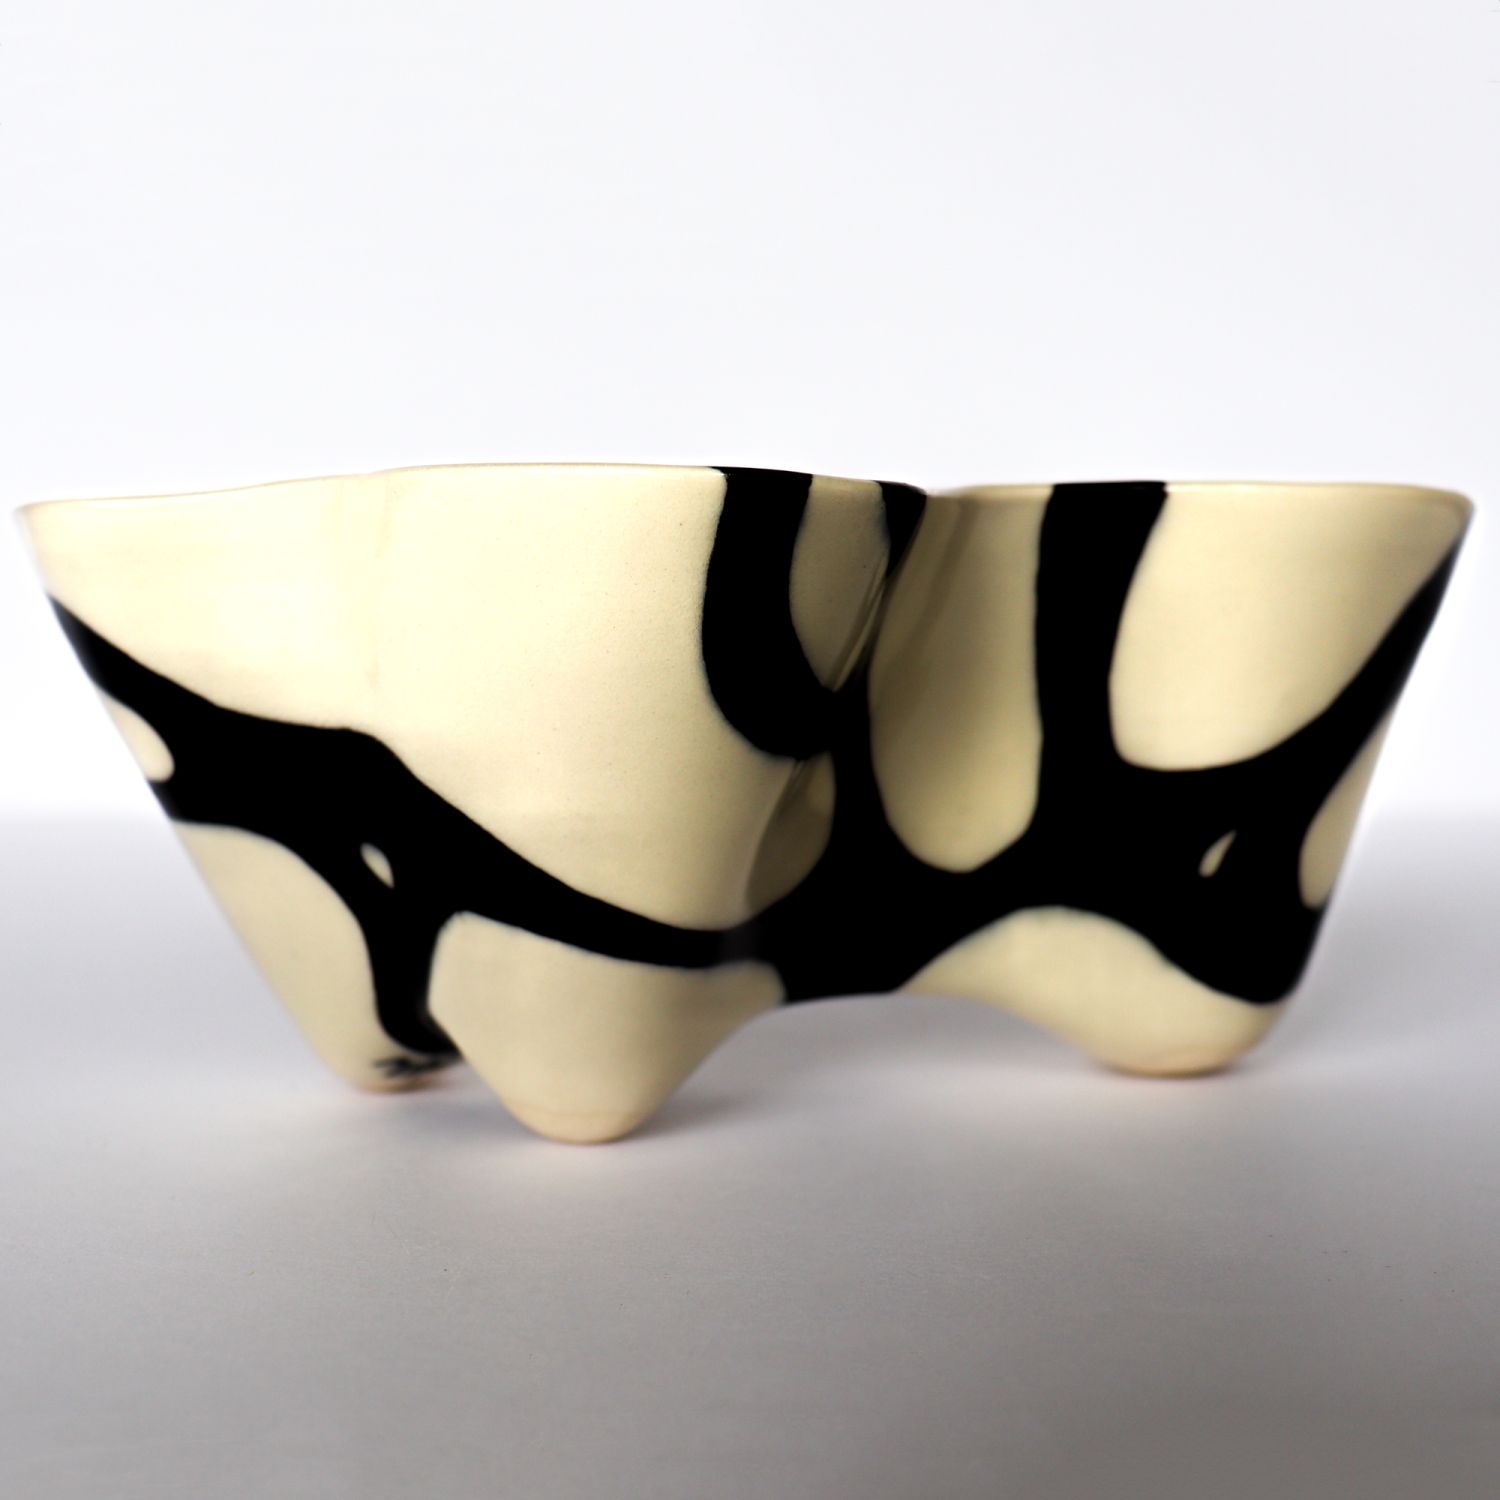 Alana Marcoccia: Interconnected Sculptural Bowl Product Image 9 of 13